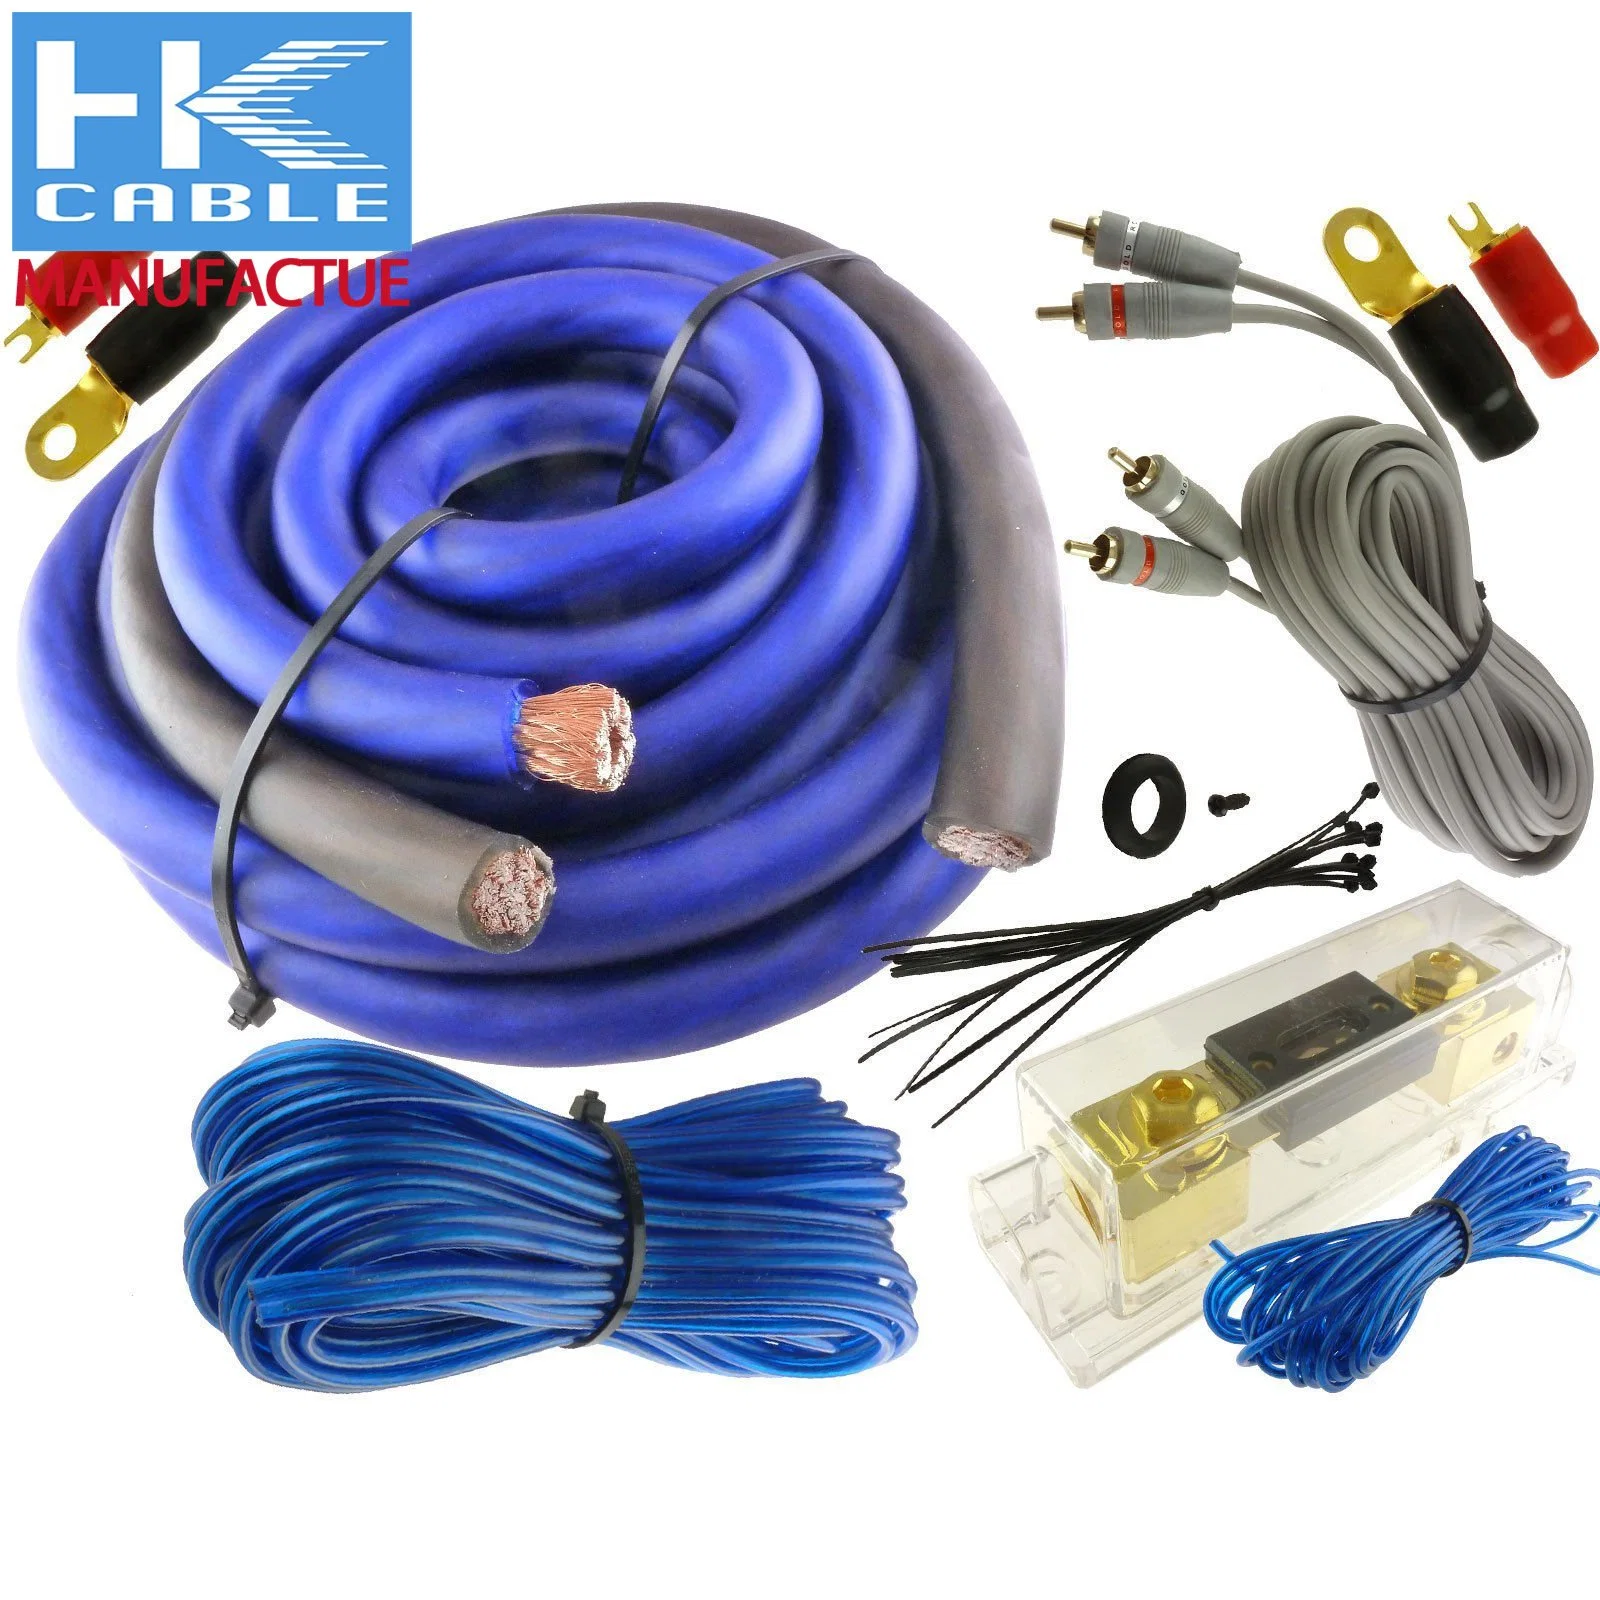 New Arrival 0 Gauge Car Audio Cable Kit Amplifier AMP Install Wiring Power Cable Amplifier Subwoofer Speaker Line